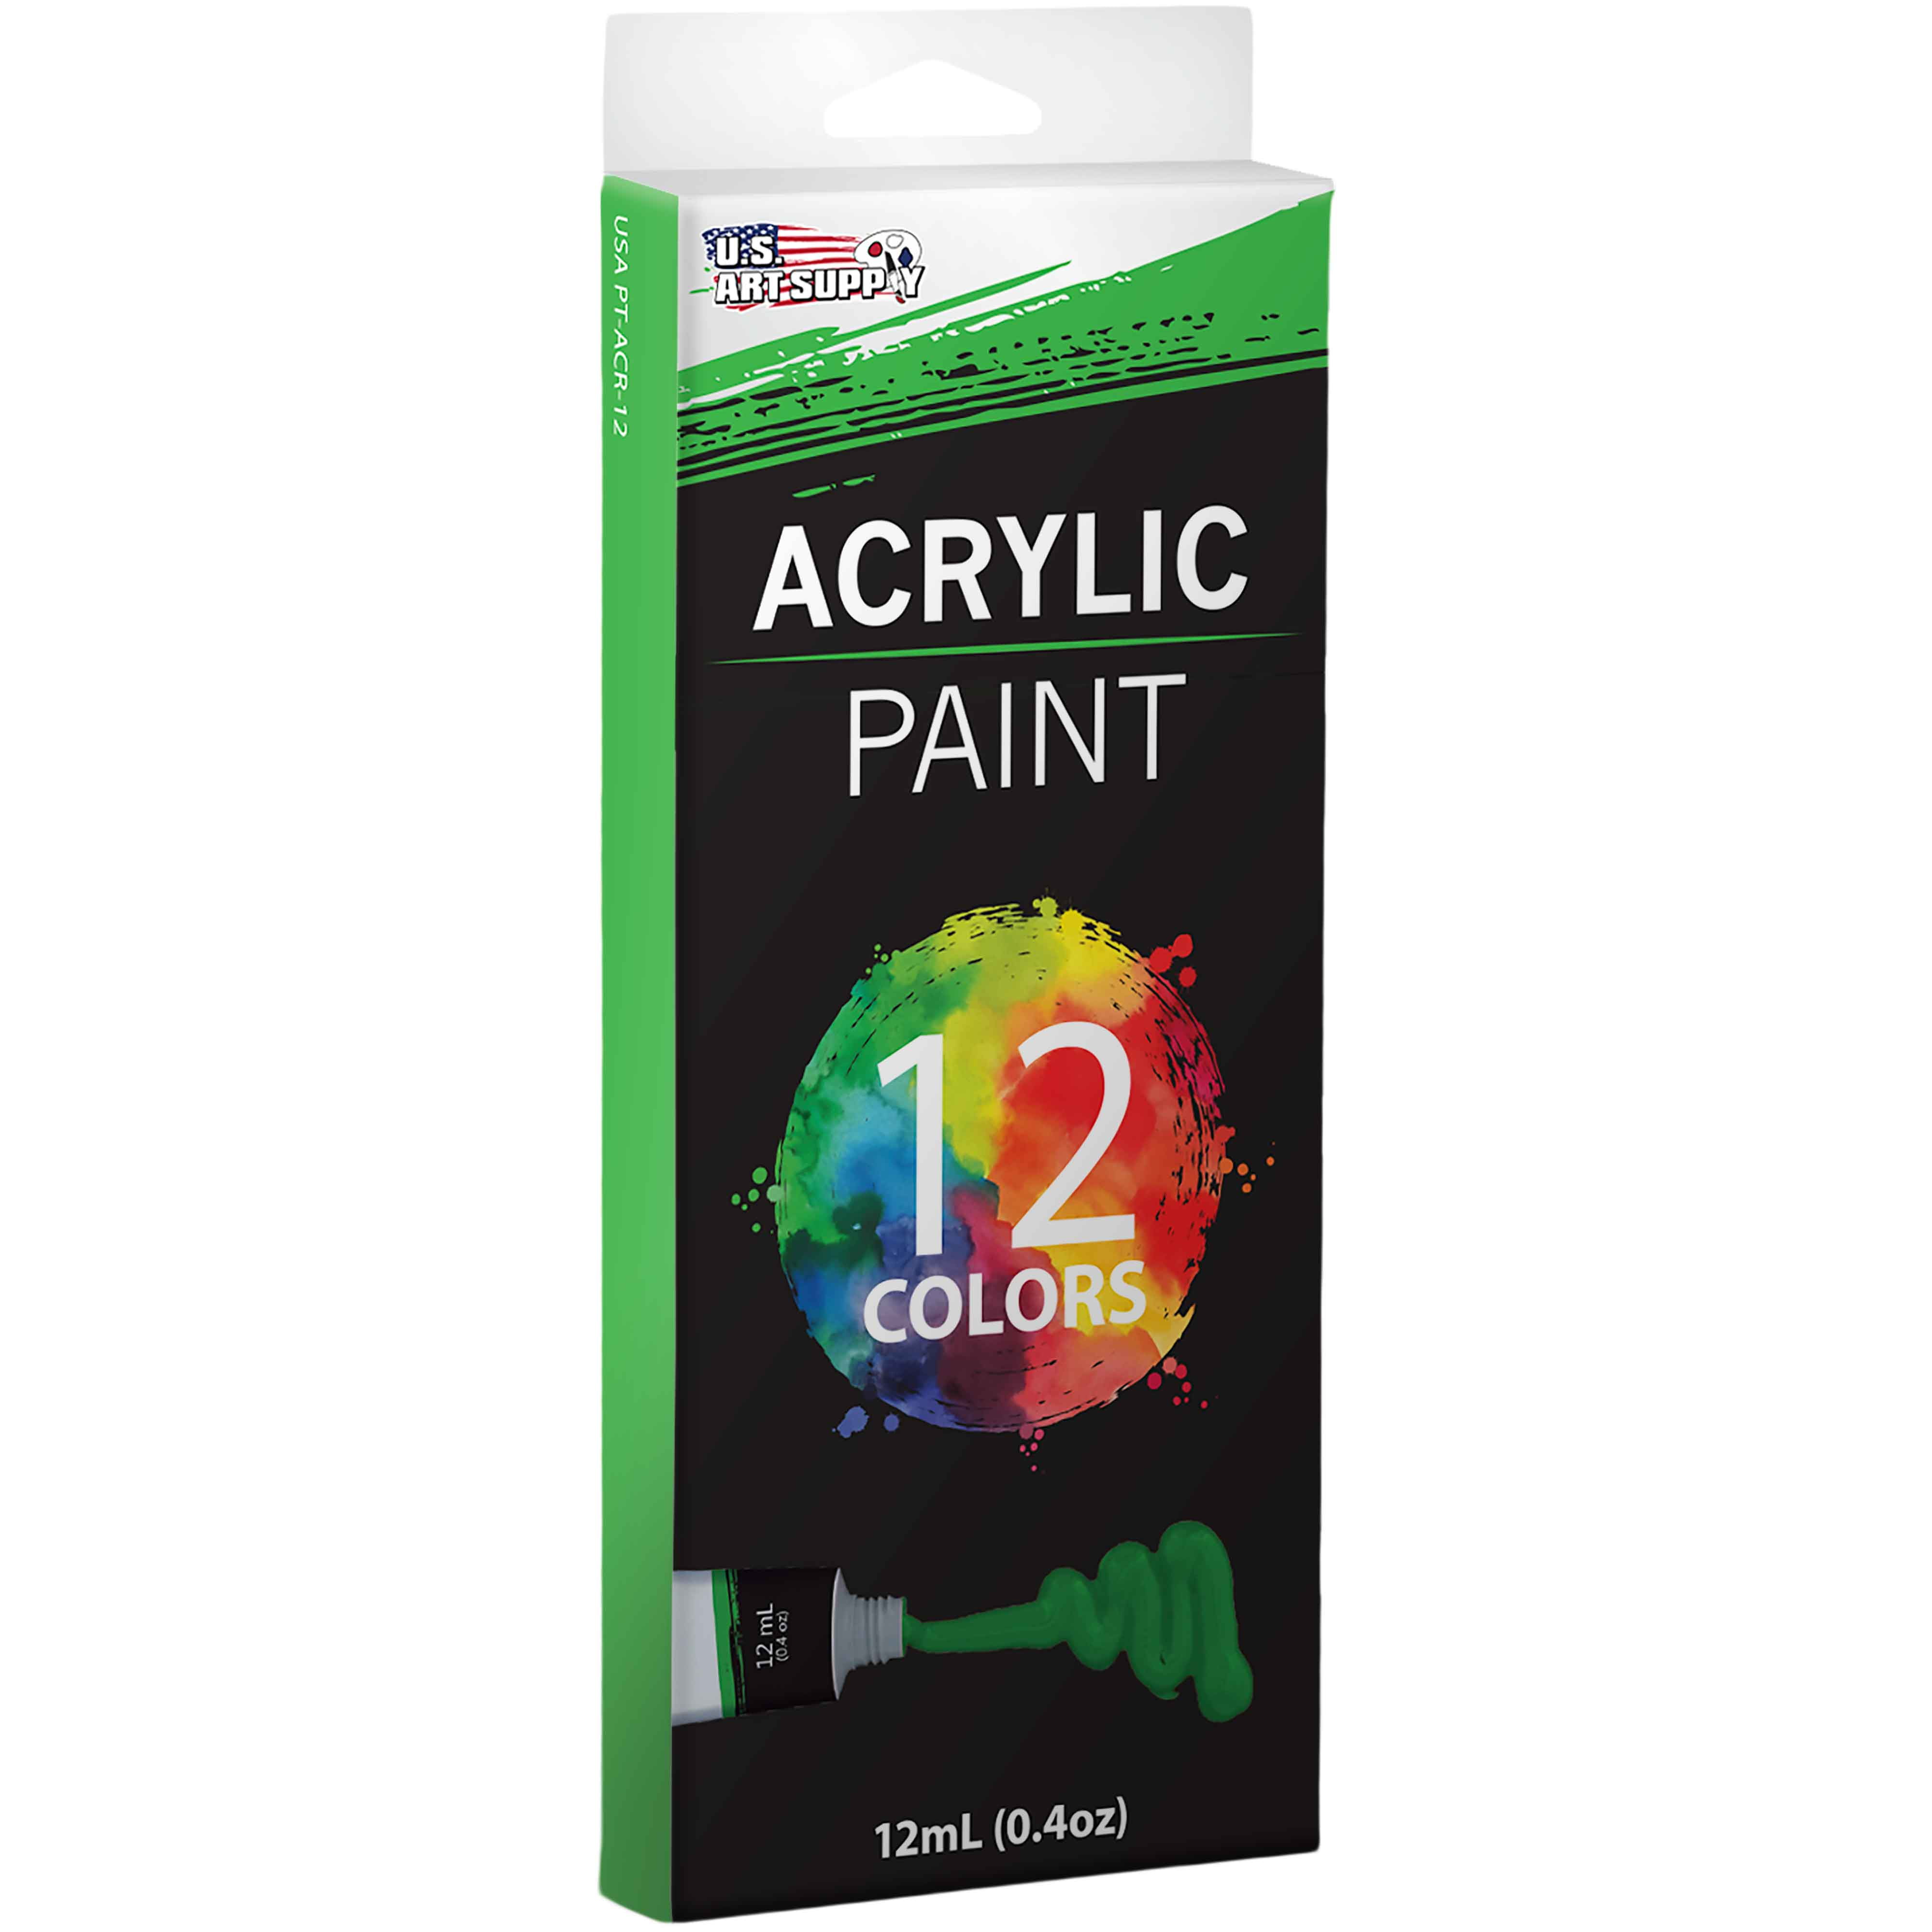 Buy Acrylic Paint Set of 24 Vivid Colors, Large Tubes (37 mL, 1.25 oz) -  Perfect Acrylic Paint Sets for Adults & Kids, Rich in Pigments - Acrylic  Paint Kit for Paper